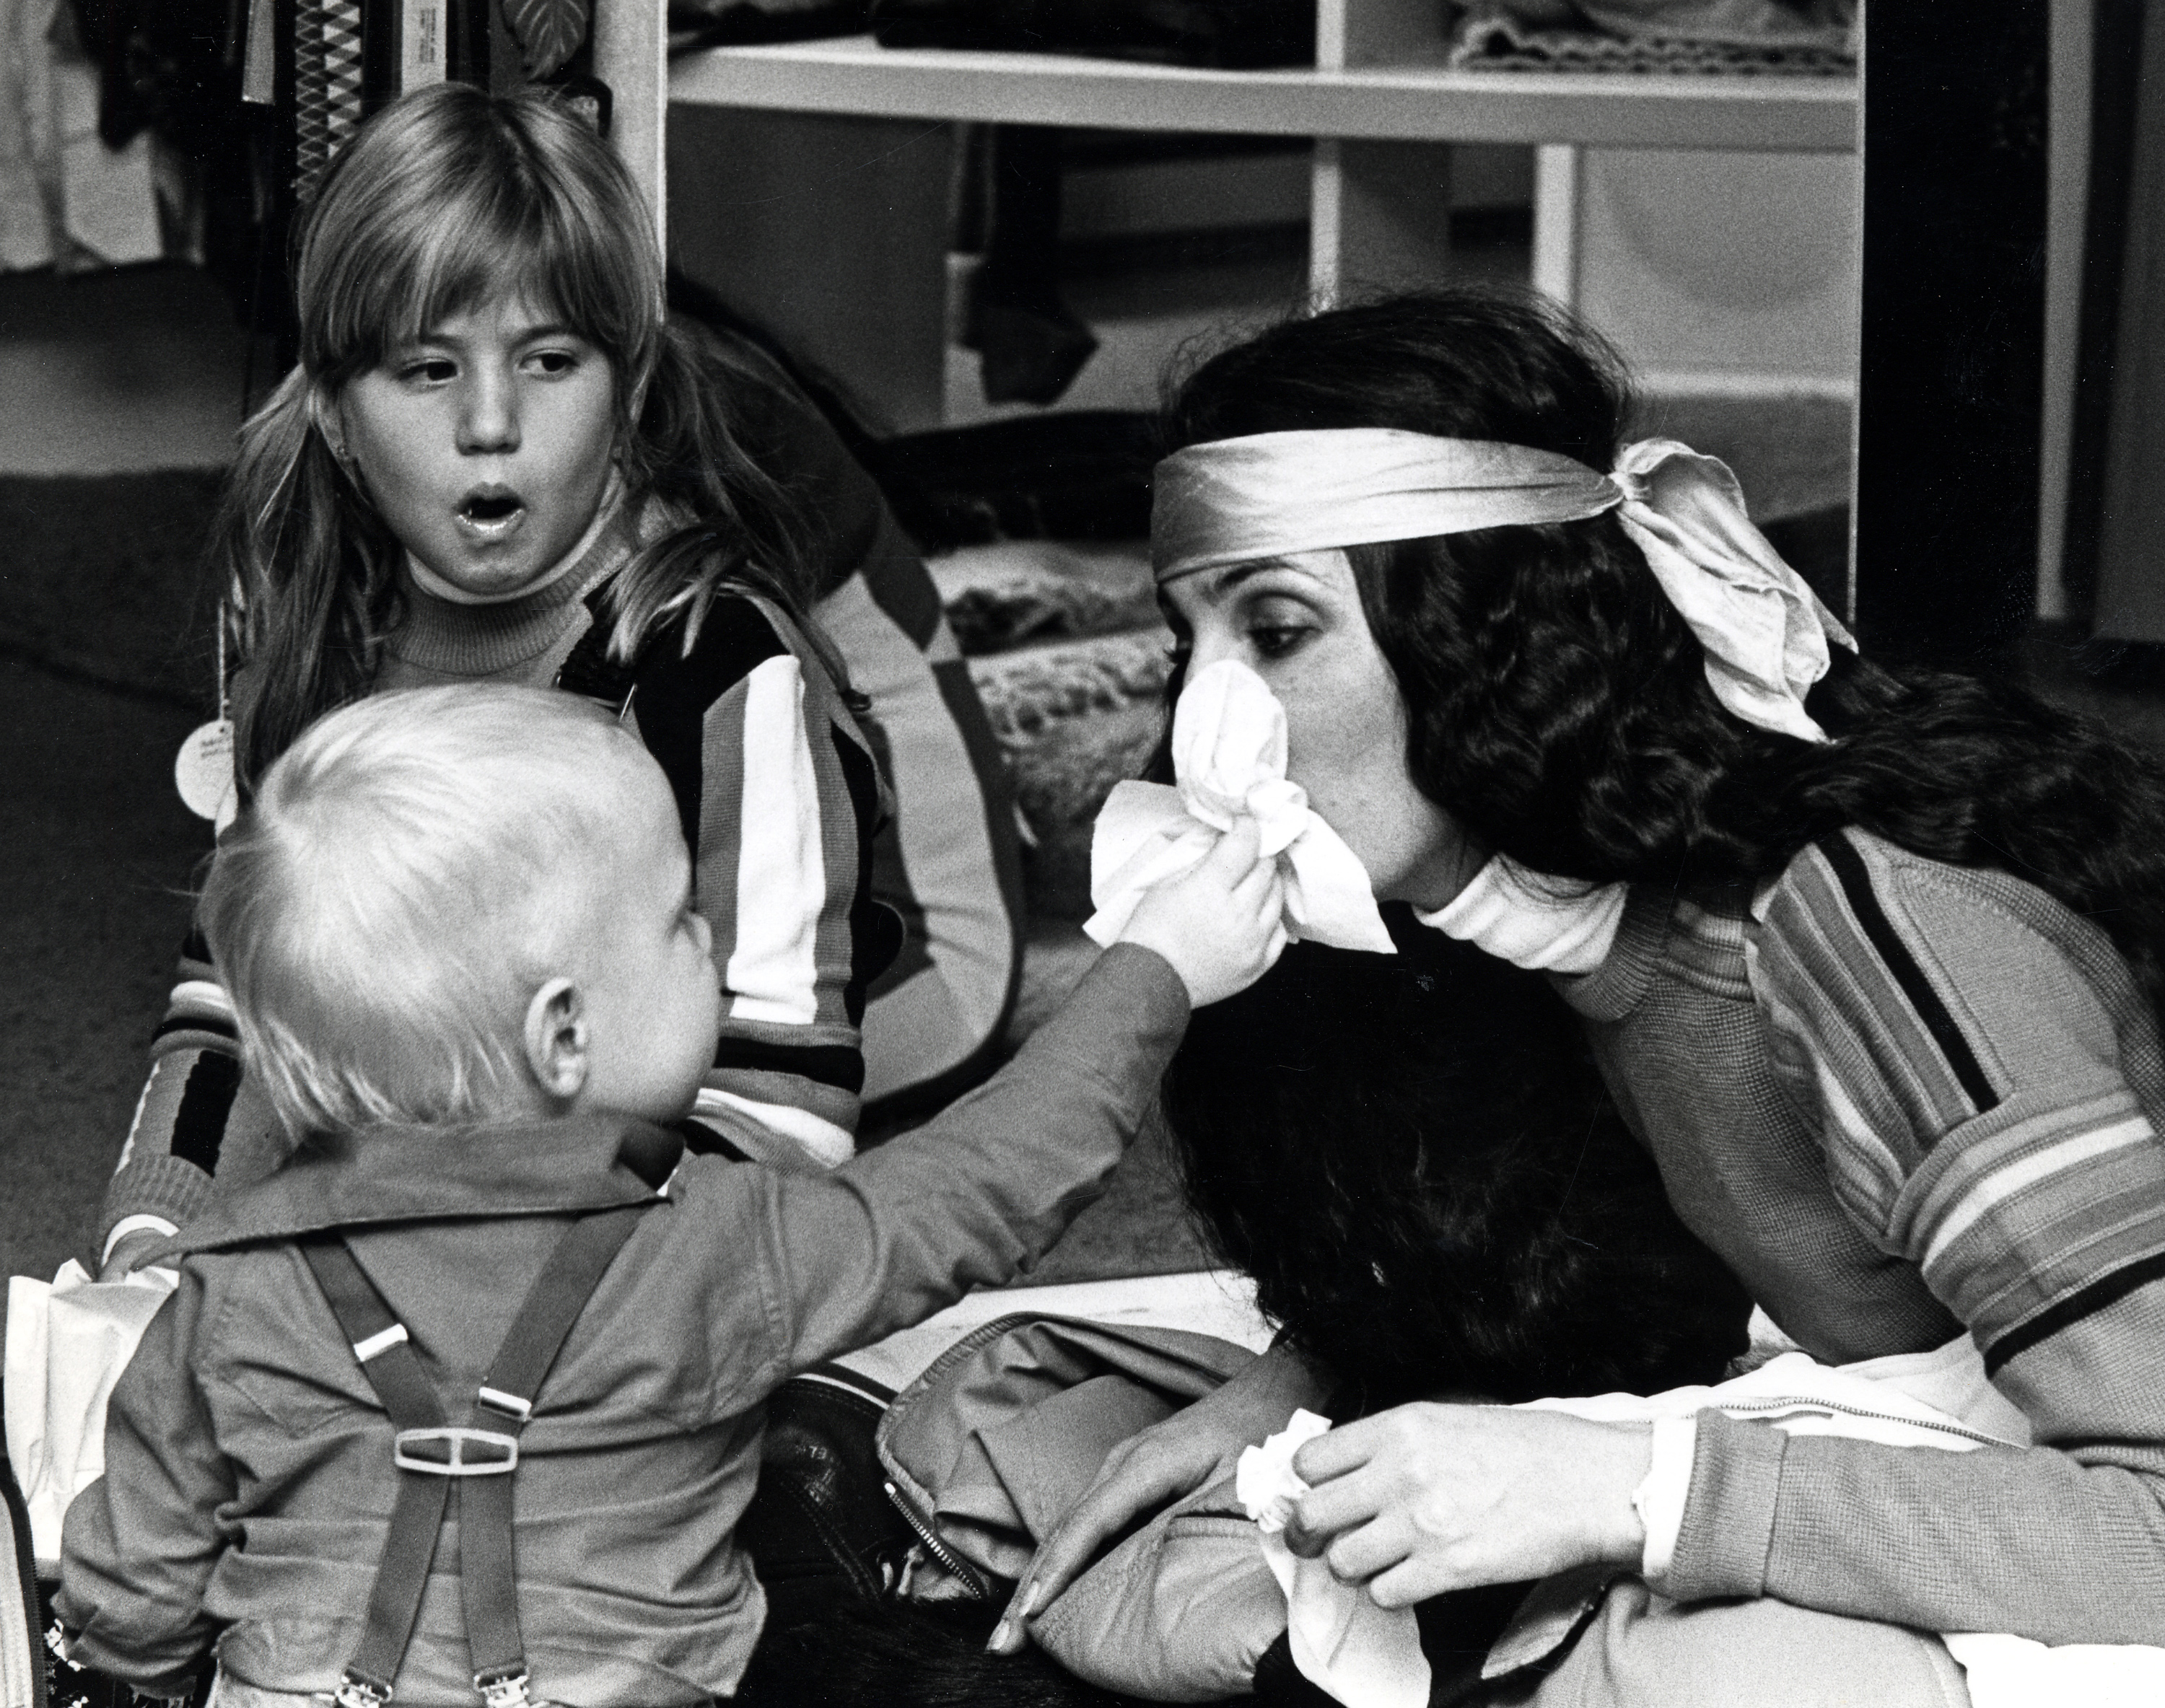 Elijah Blue Allman, Chastity Bono, and Cher in Aspen on January 12, 1977 | Source: Getty Images